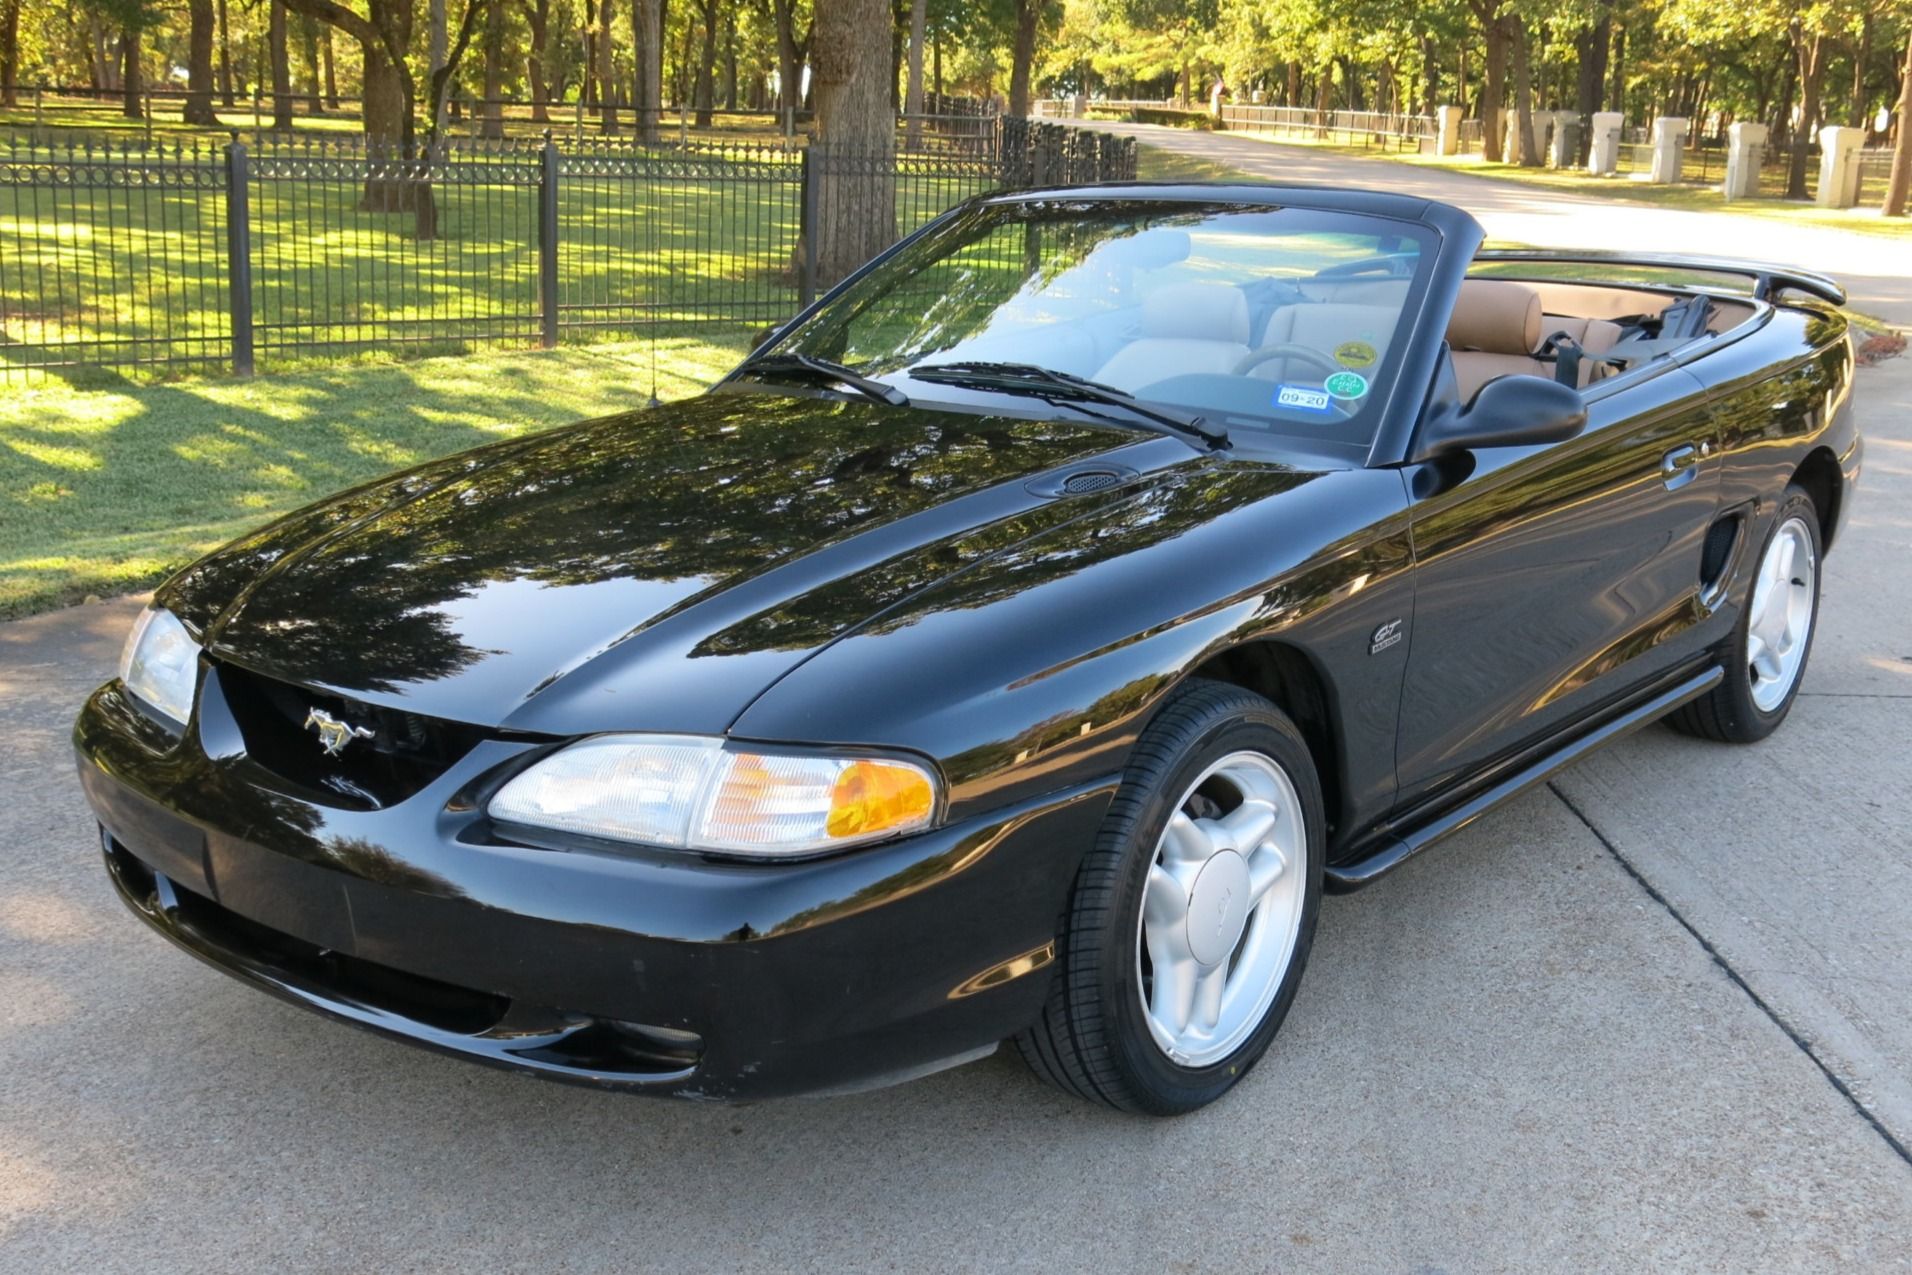 1995 Ford Mustang: The iconic muscle car.